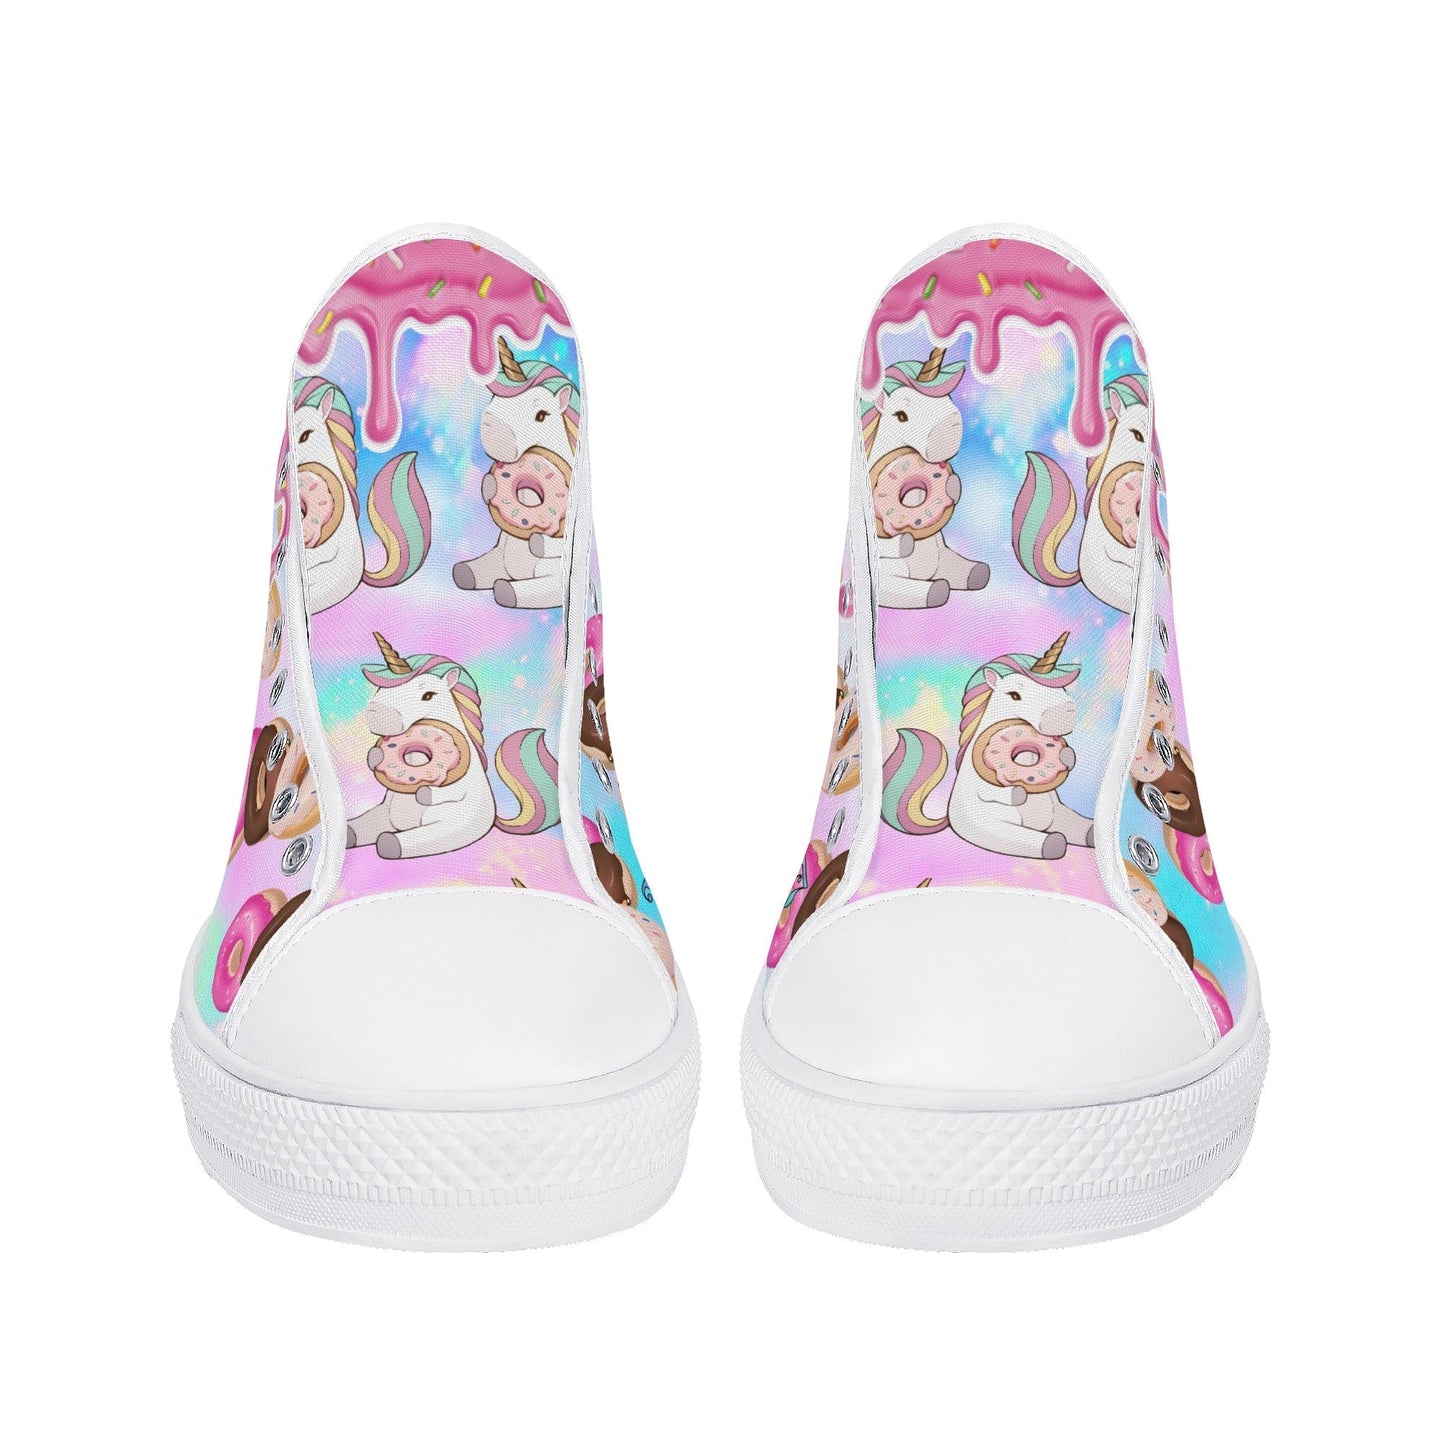 Stand out  with the  My Little Doughnut Womens High Top Canvas Shoes  available at Hey Nugget. Grab yours today!